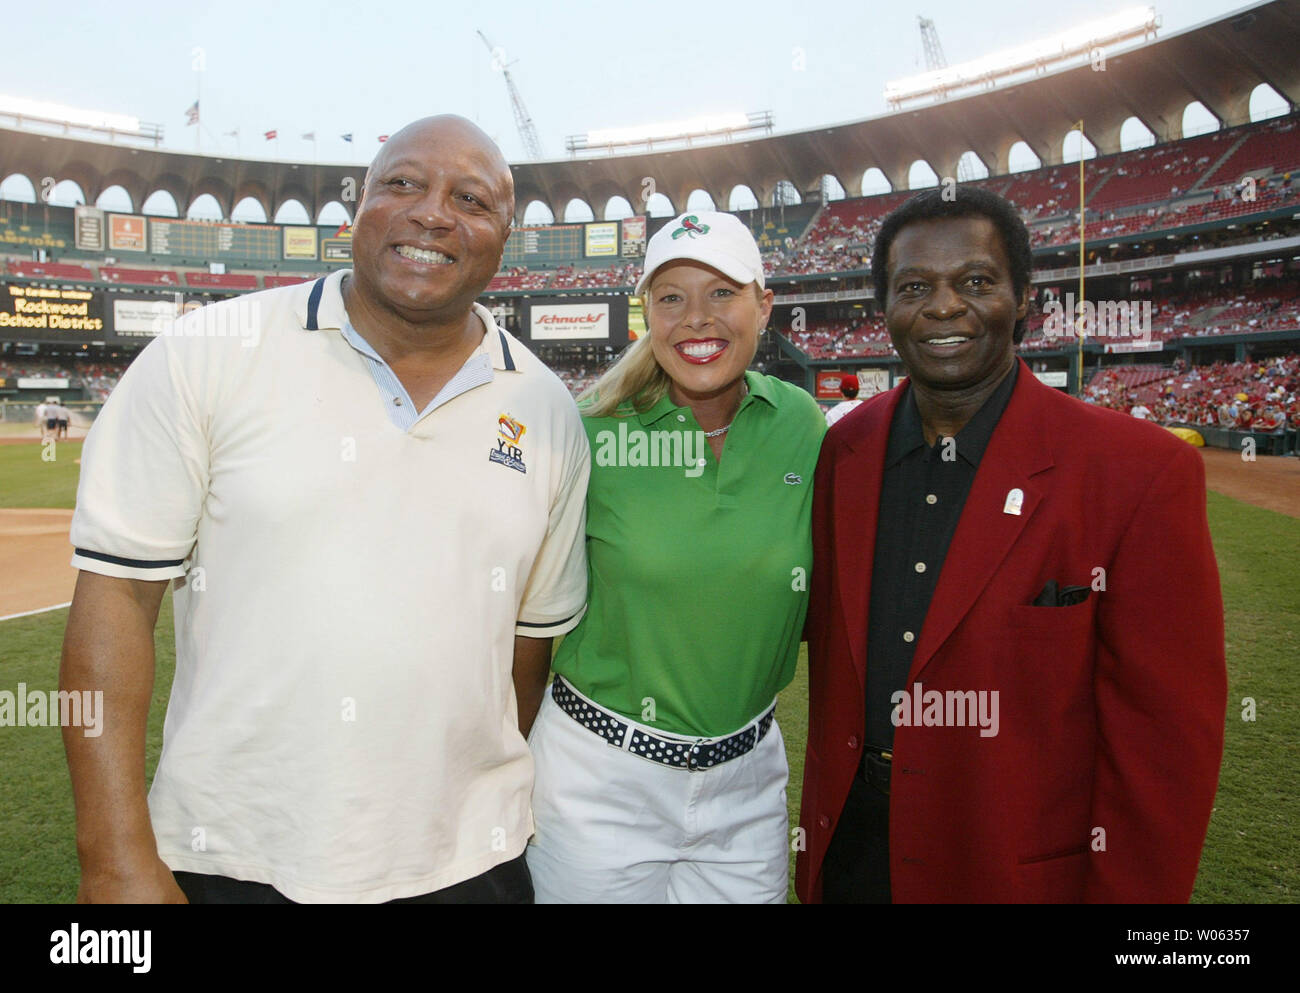 Former WBA heavyweight champion, James 'bonecrusher' Smith, professional golfer Michelle McGann and Baseball Hall of Famer Lou Brock (R) pose for a photo on the field at Busch Stadium before a game between the New York Mets and the St. Louis Cardinals in St. Louis on September 9, 2005. (UPI Photo/Bill Greenblatt) Stock Photo